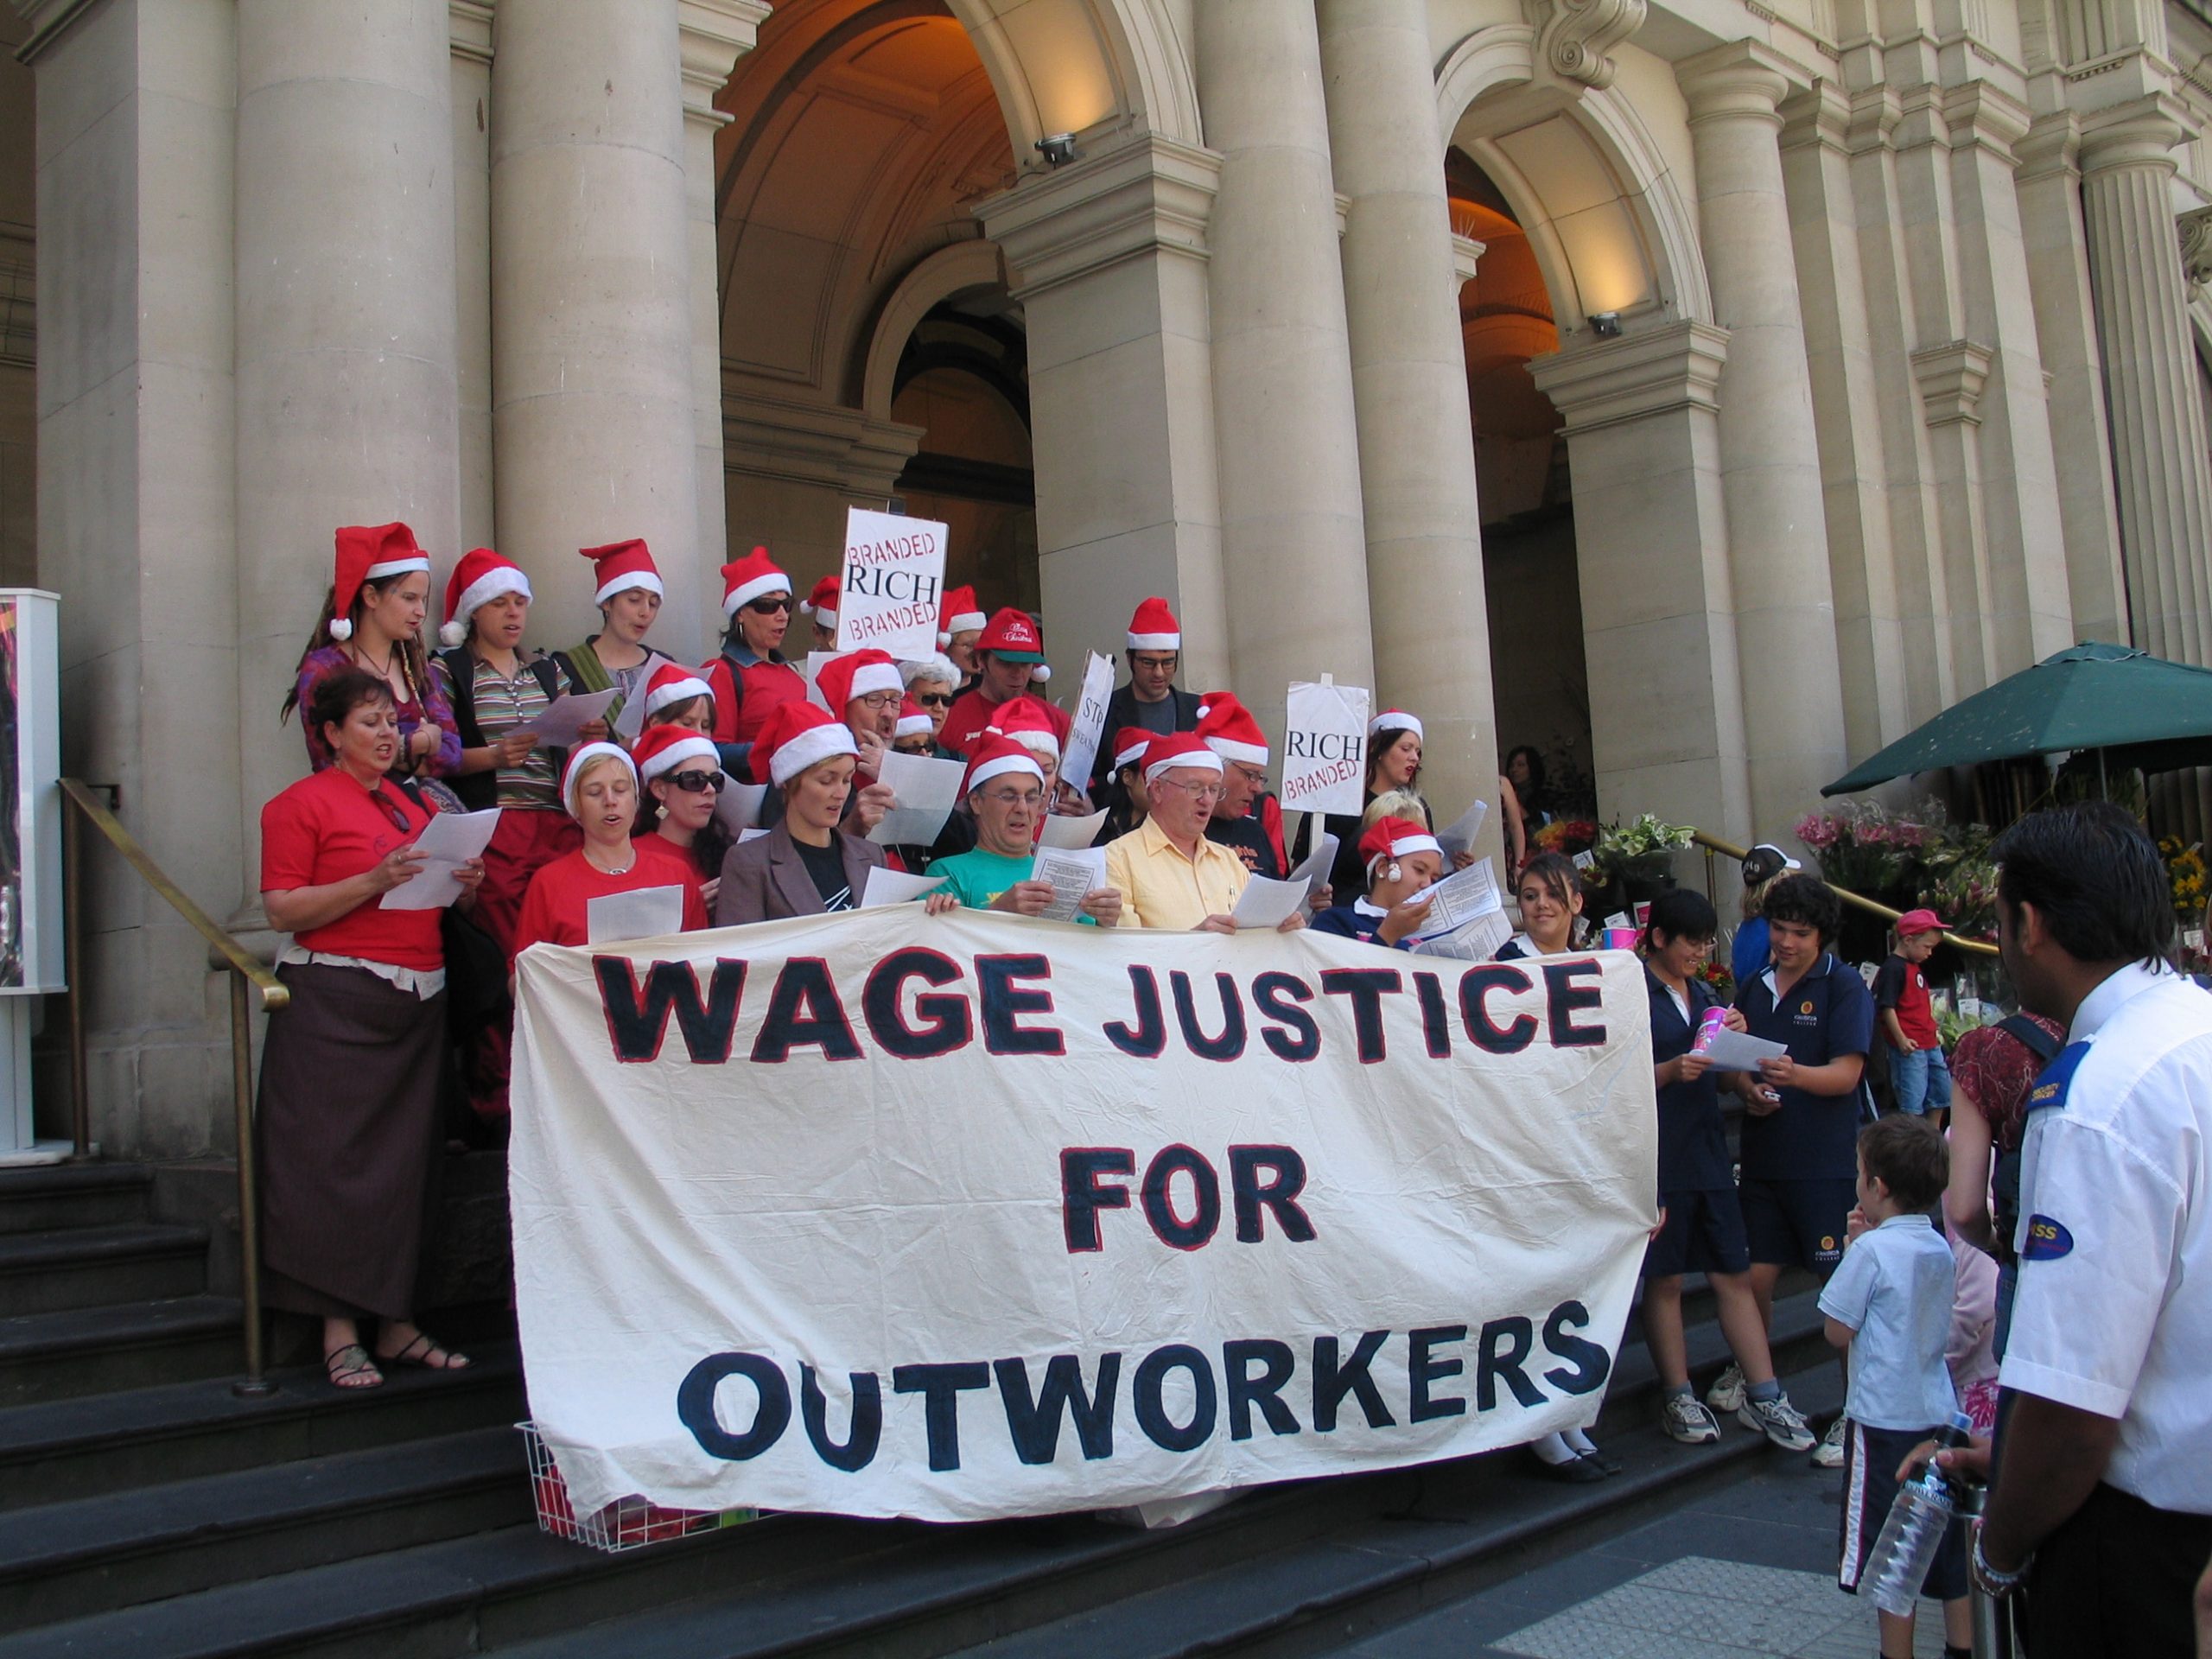 Protestors singing carols outside on steps. They are wearing santa hats and holding a banner that says Wage Justice for Outworkers.